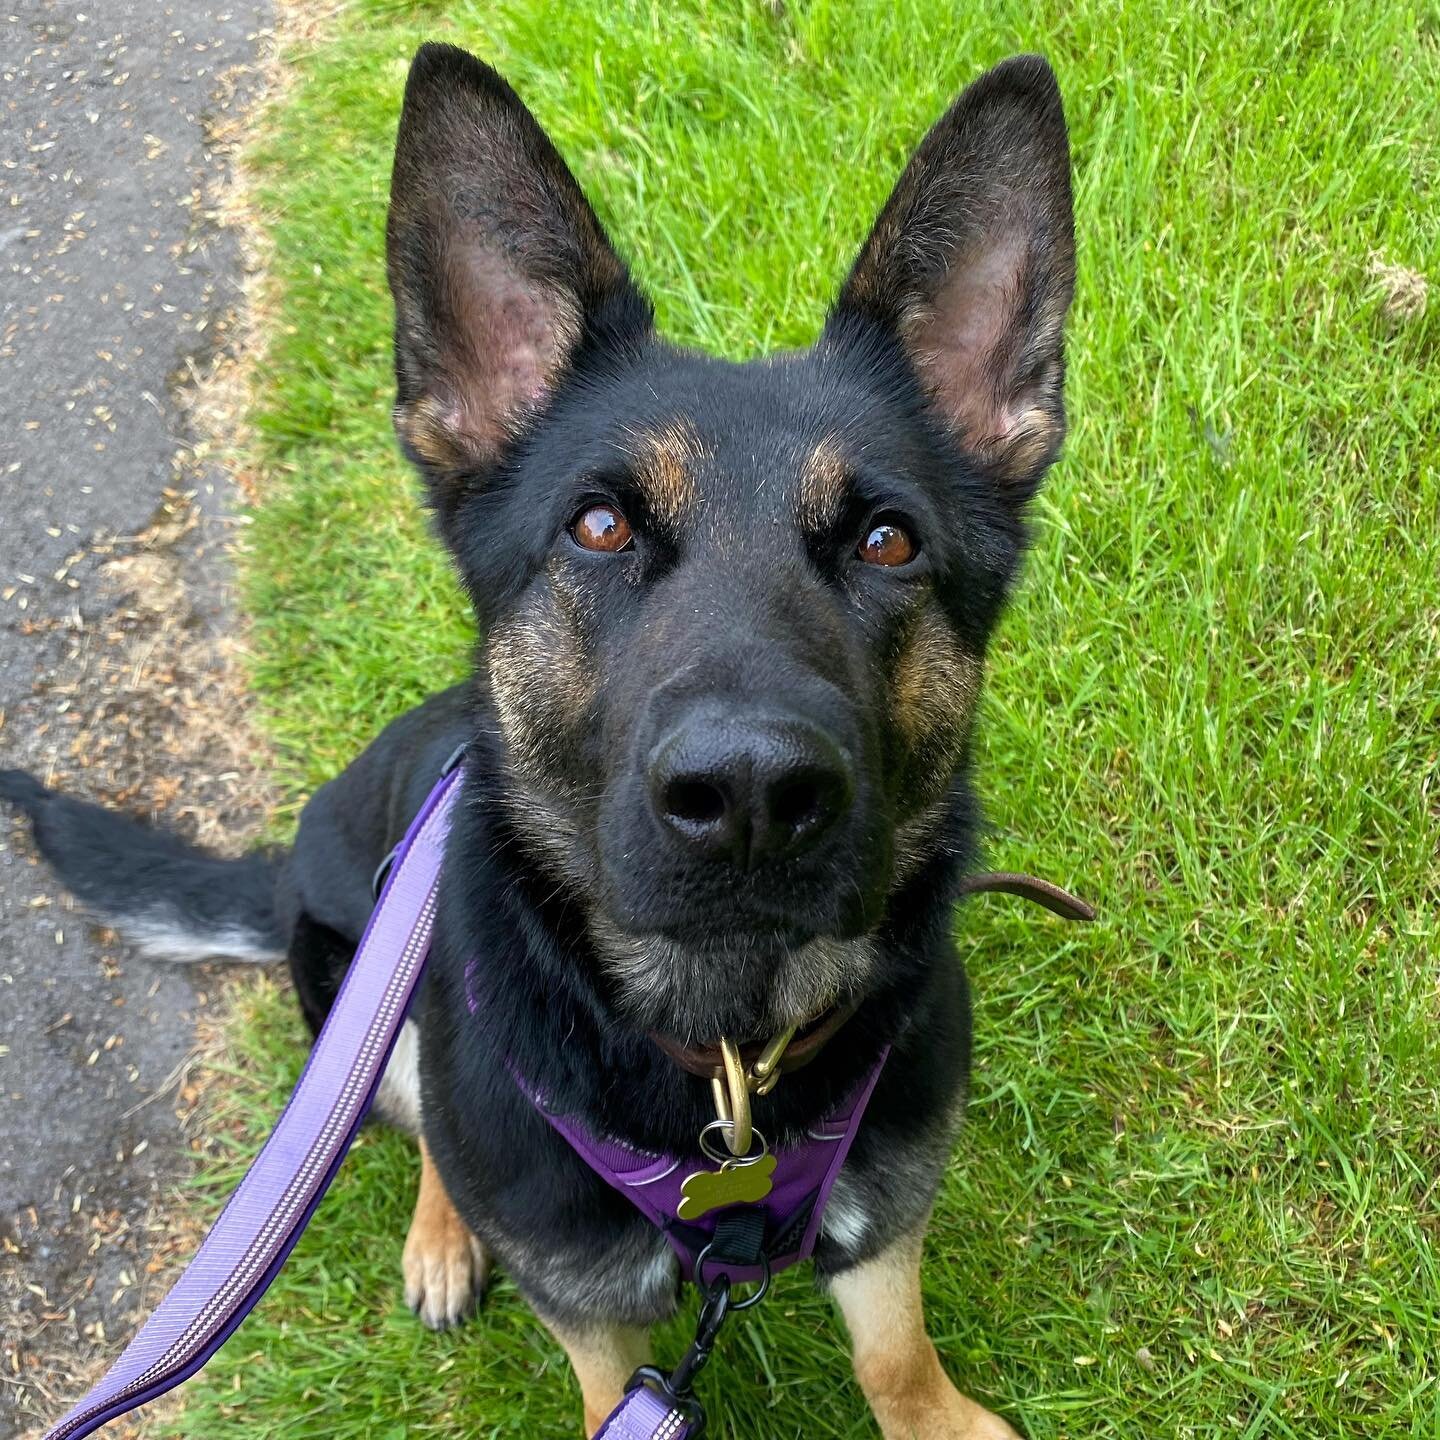 Beautiful girl Emma started some training with me this week to help build some confidence and help her feel less worried about seeing other dogs on walks 🥰

#dogtraining #dogtrainer #dogtrainers #dogtrainersofinstagram #forcefreetraining #forcefreed